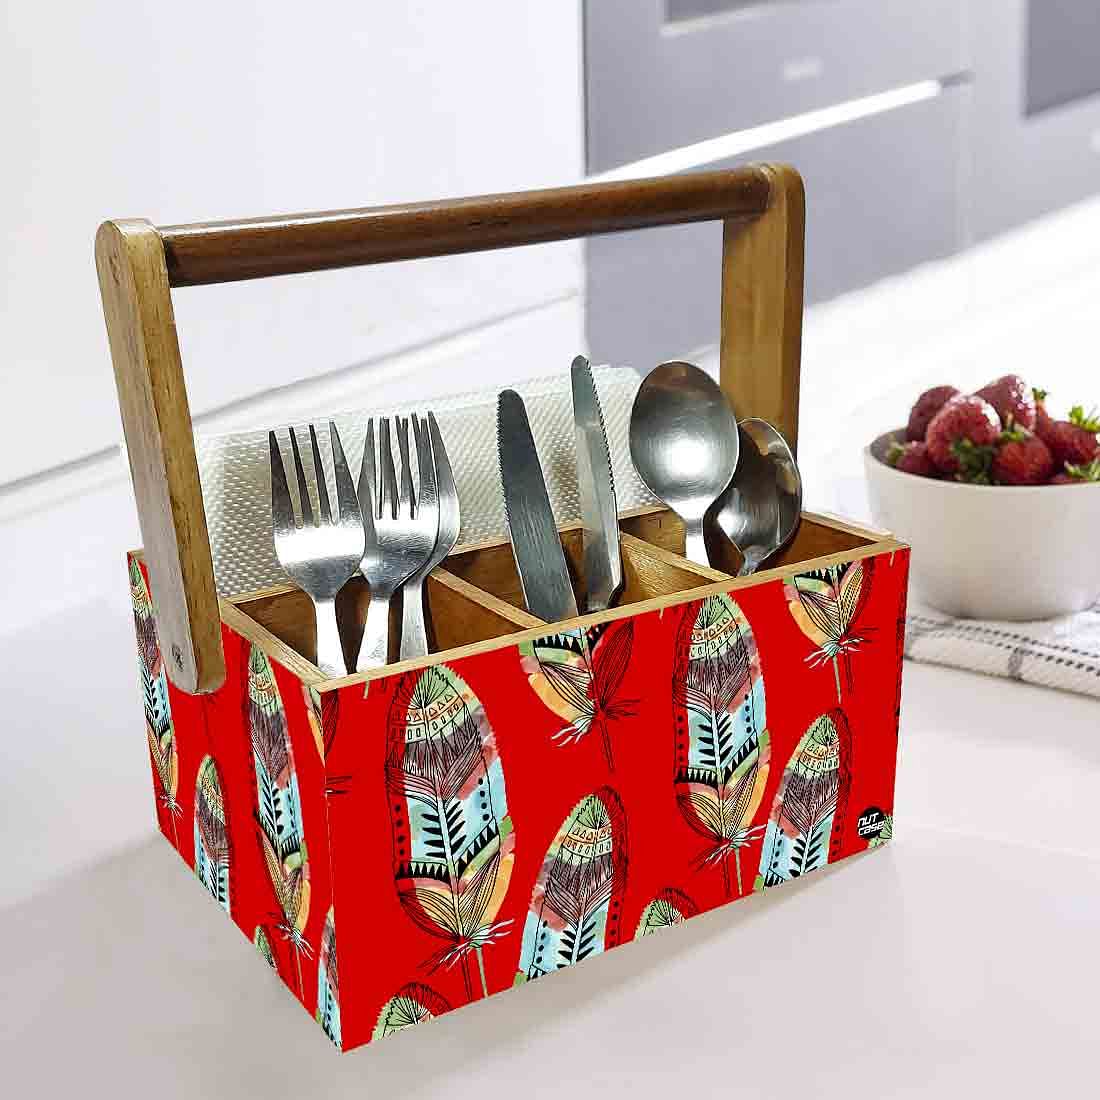 Silverware Cutlery Stand Holder for Spoons Tissue & Knives - Feathers Nutcase